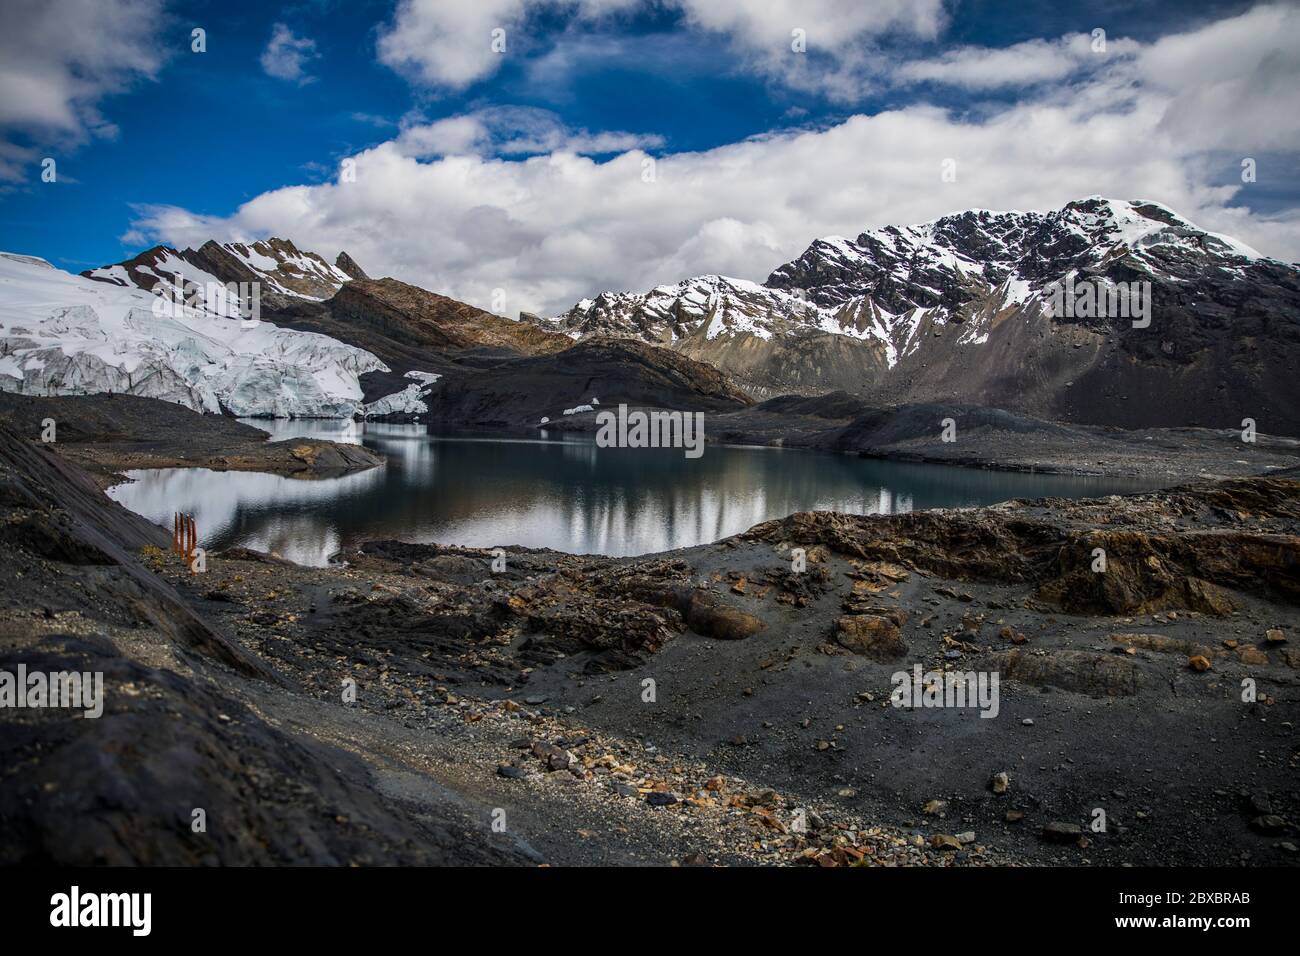 landscape with a glacier and snowy, beautiful lake, clouds and blue sky, no people Stock Photo